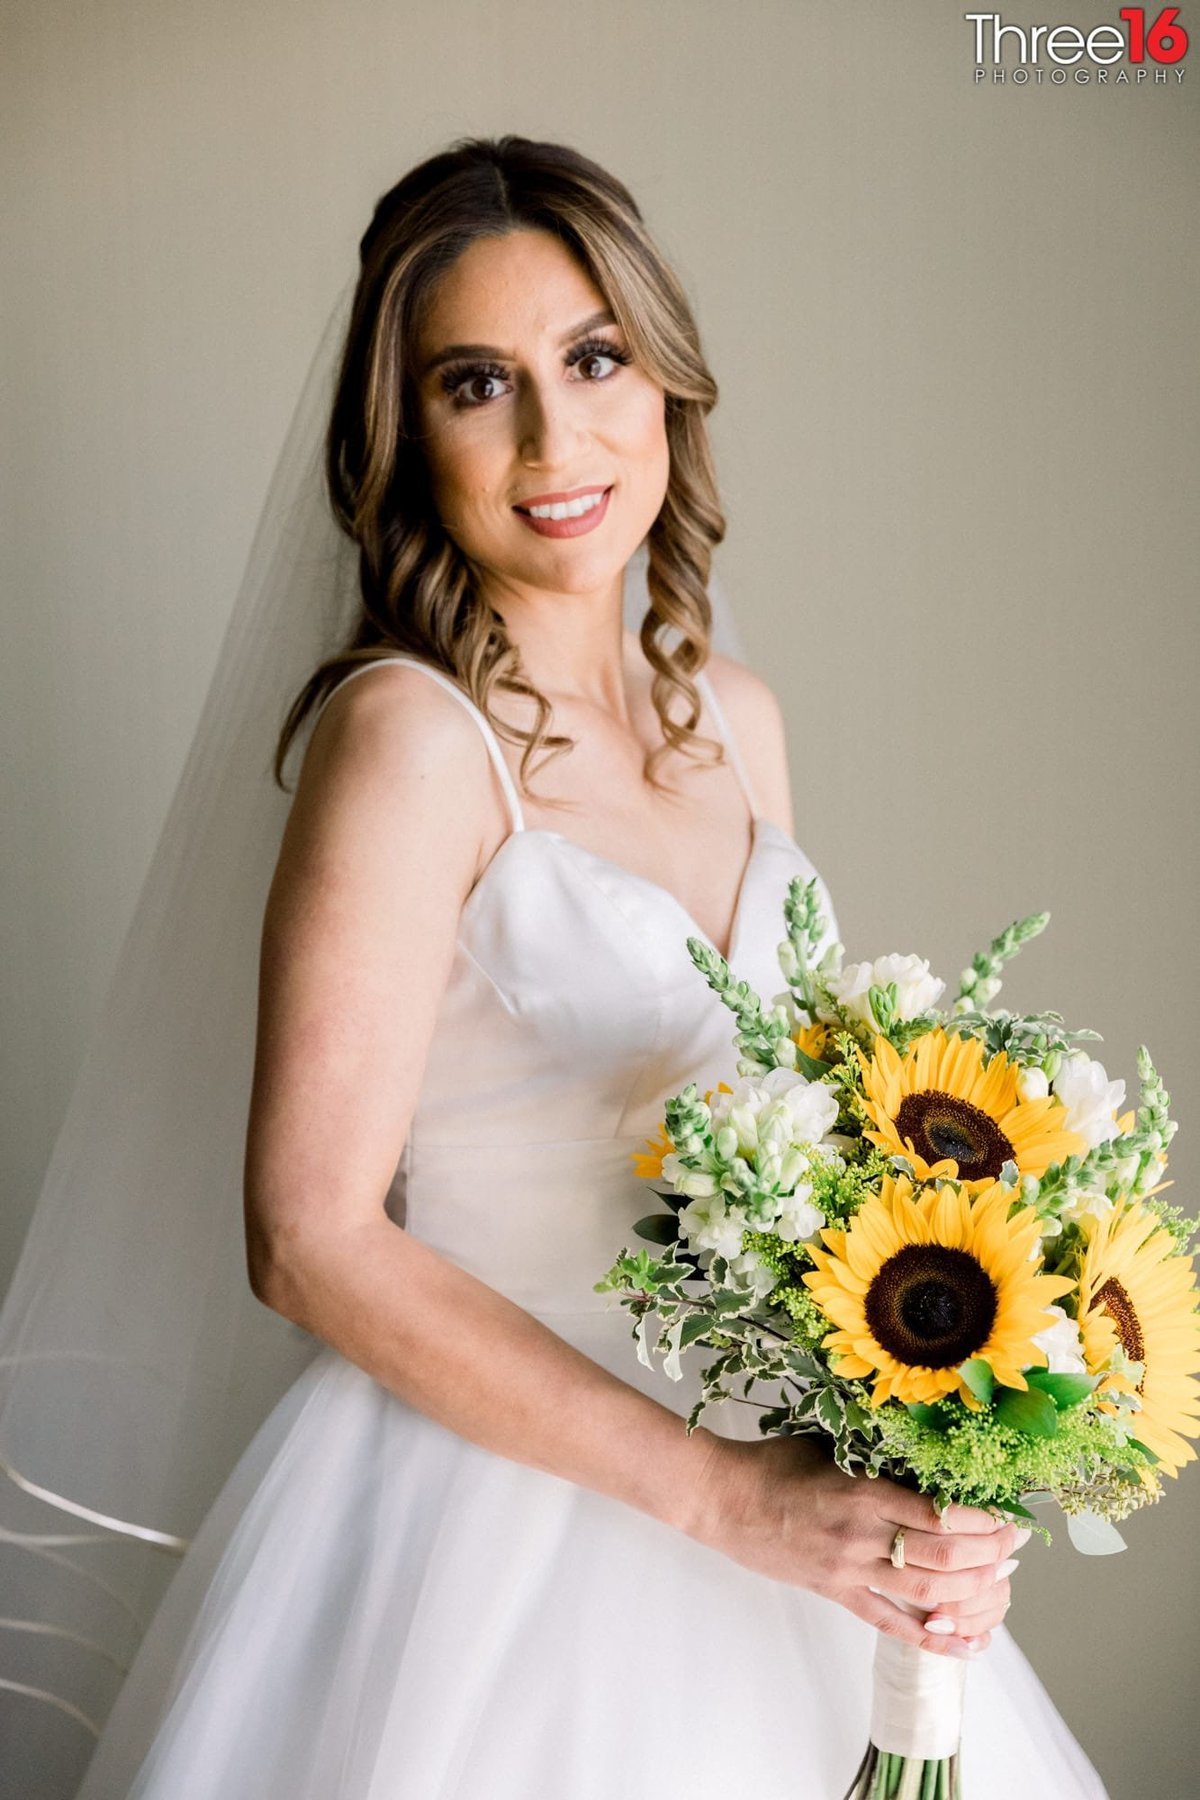 Bride poses before the ceremony holding her bouquet of flowers that includes sunflowers